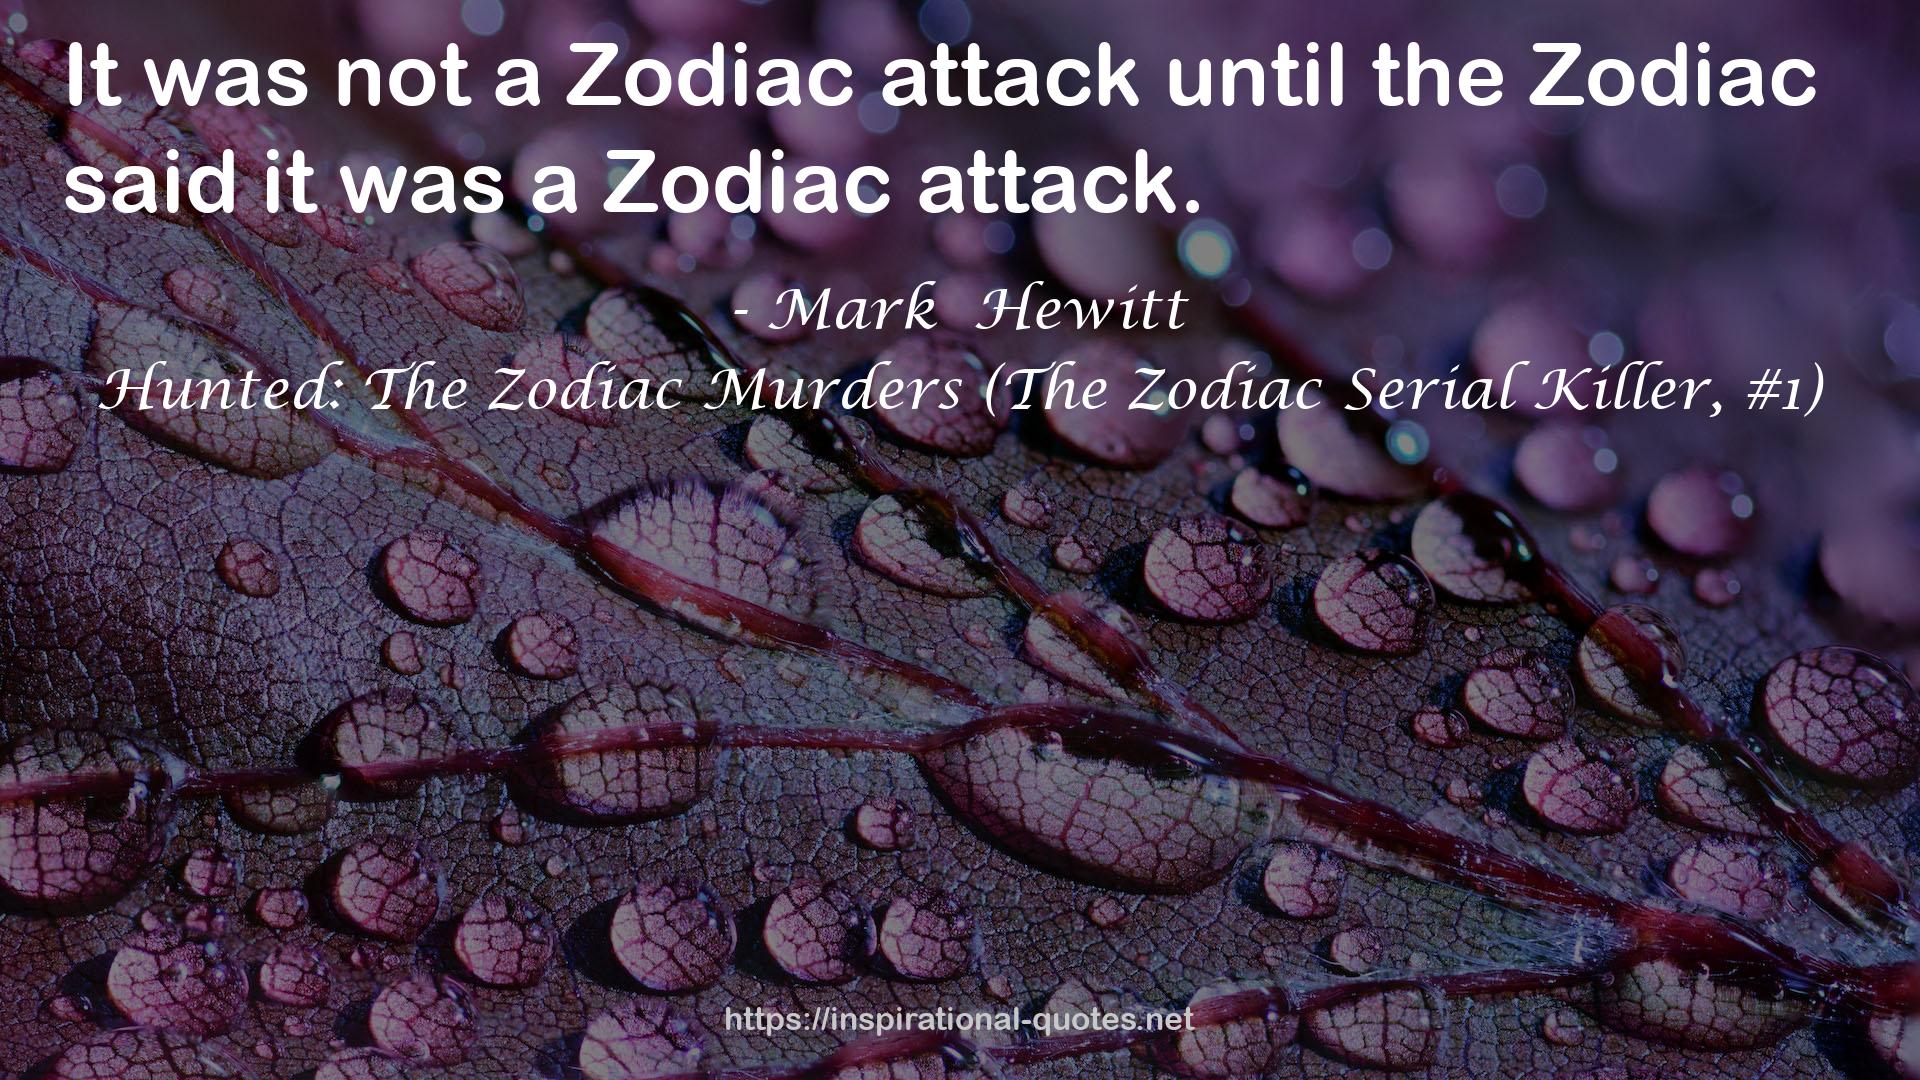 Hunted: The Zodiac Murders (The Zodiac Serial Killer, #1) QUOTES